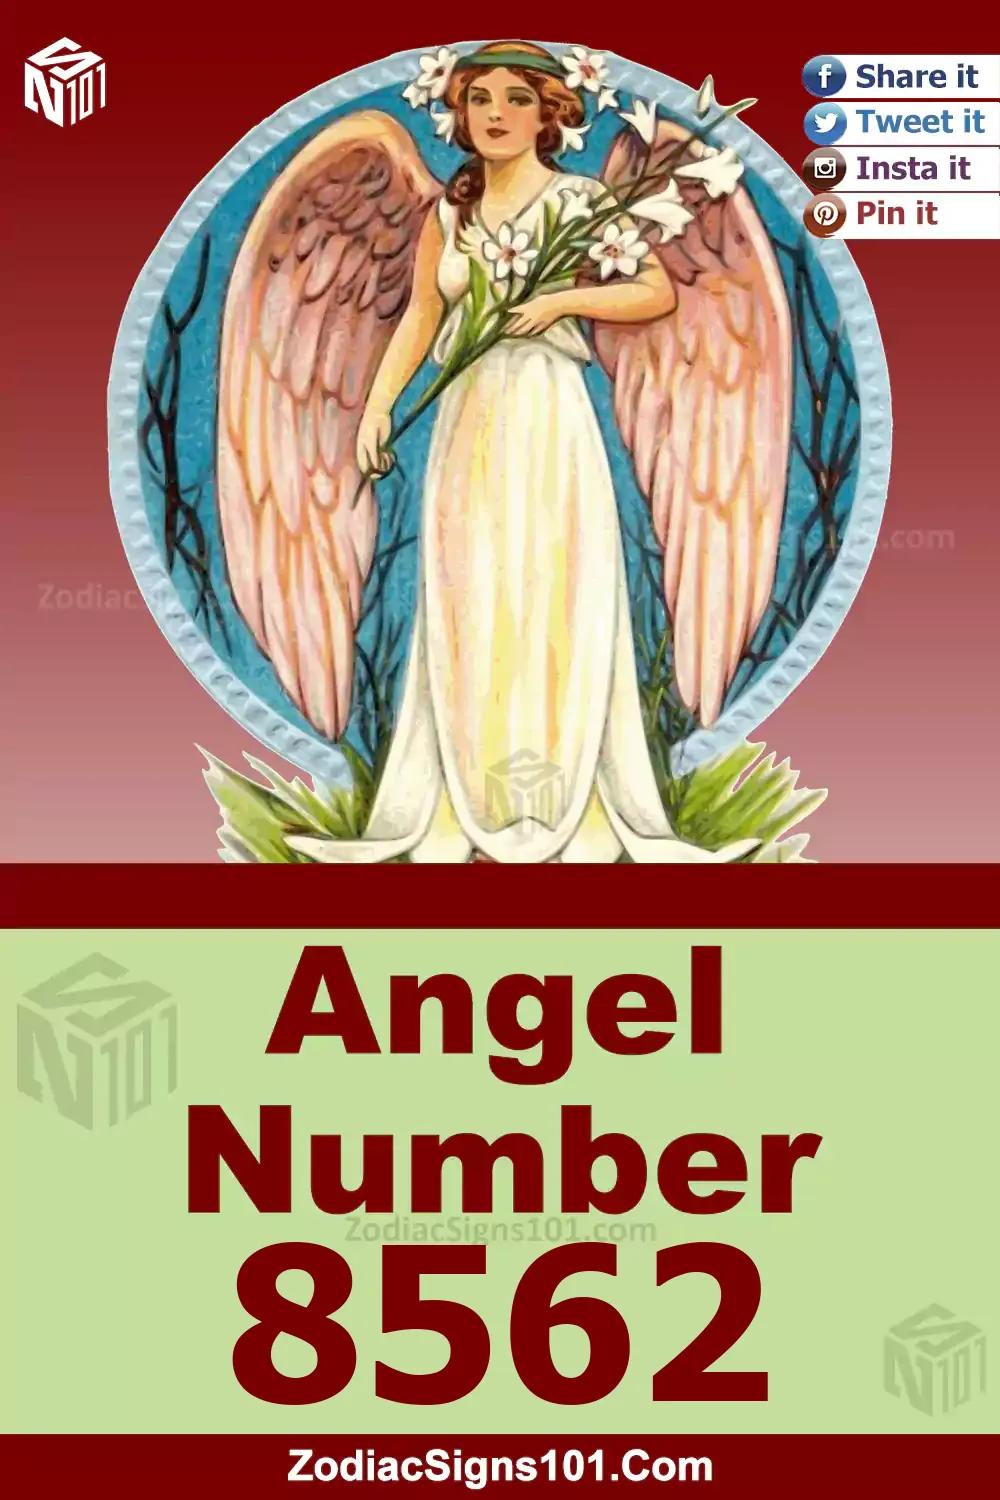 8562 Angel Number Meaning